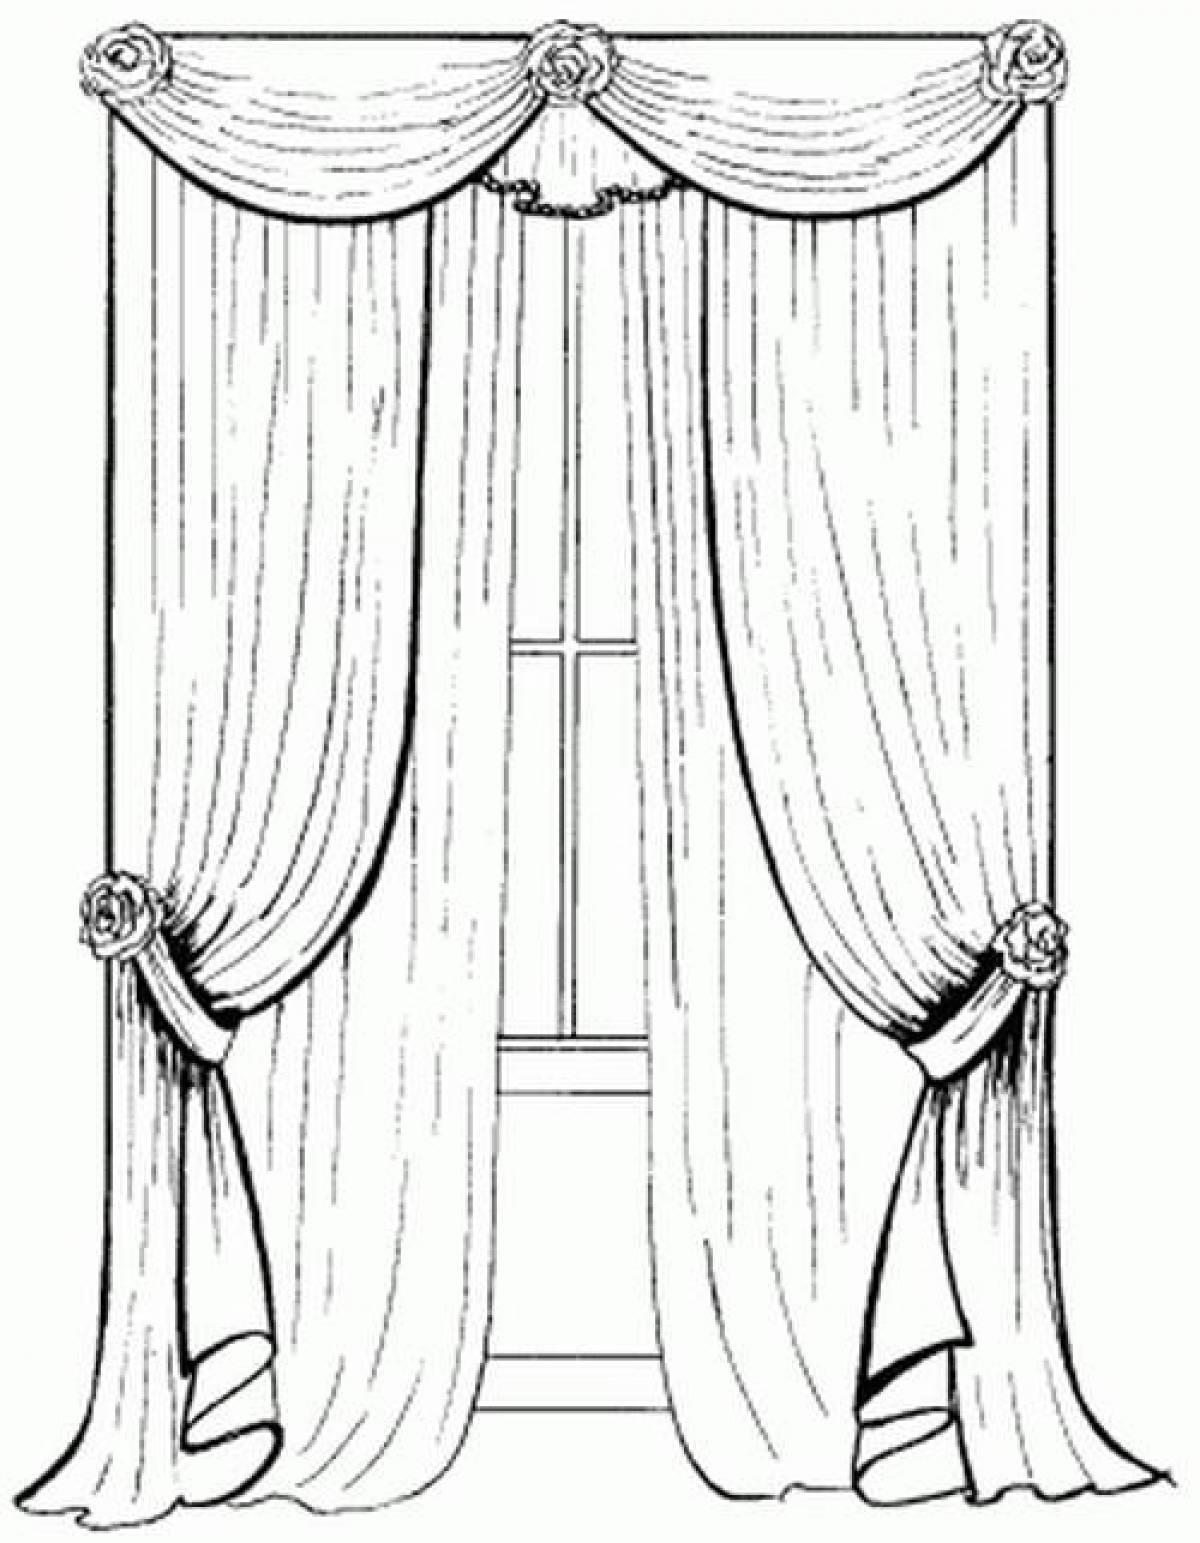 Curtains on the window